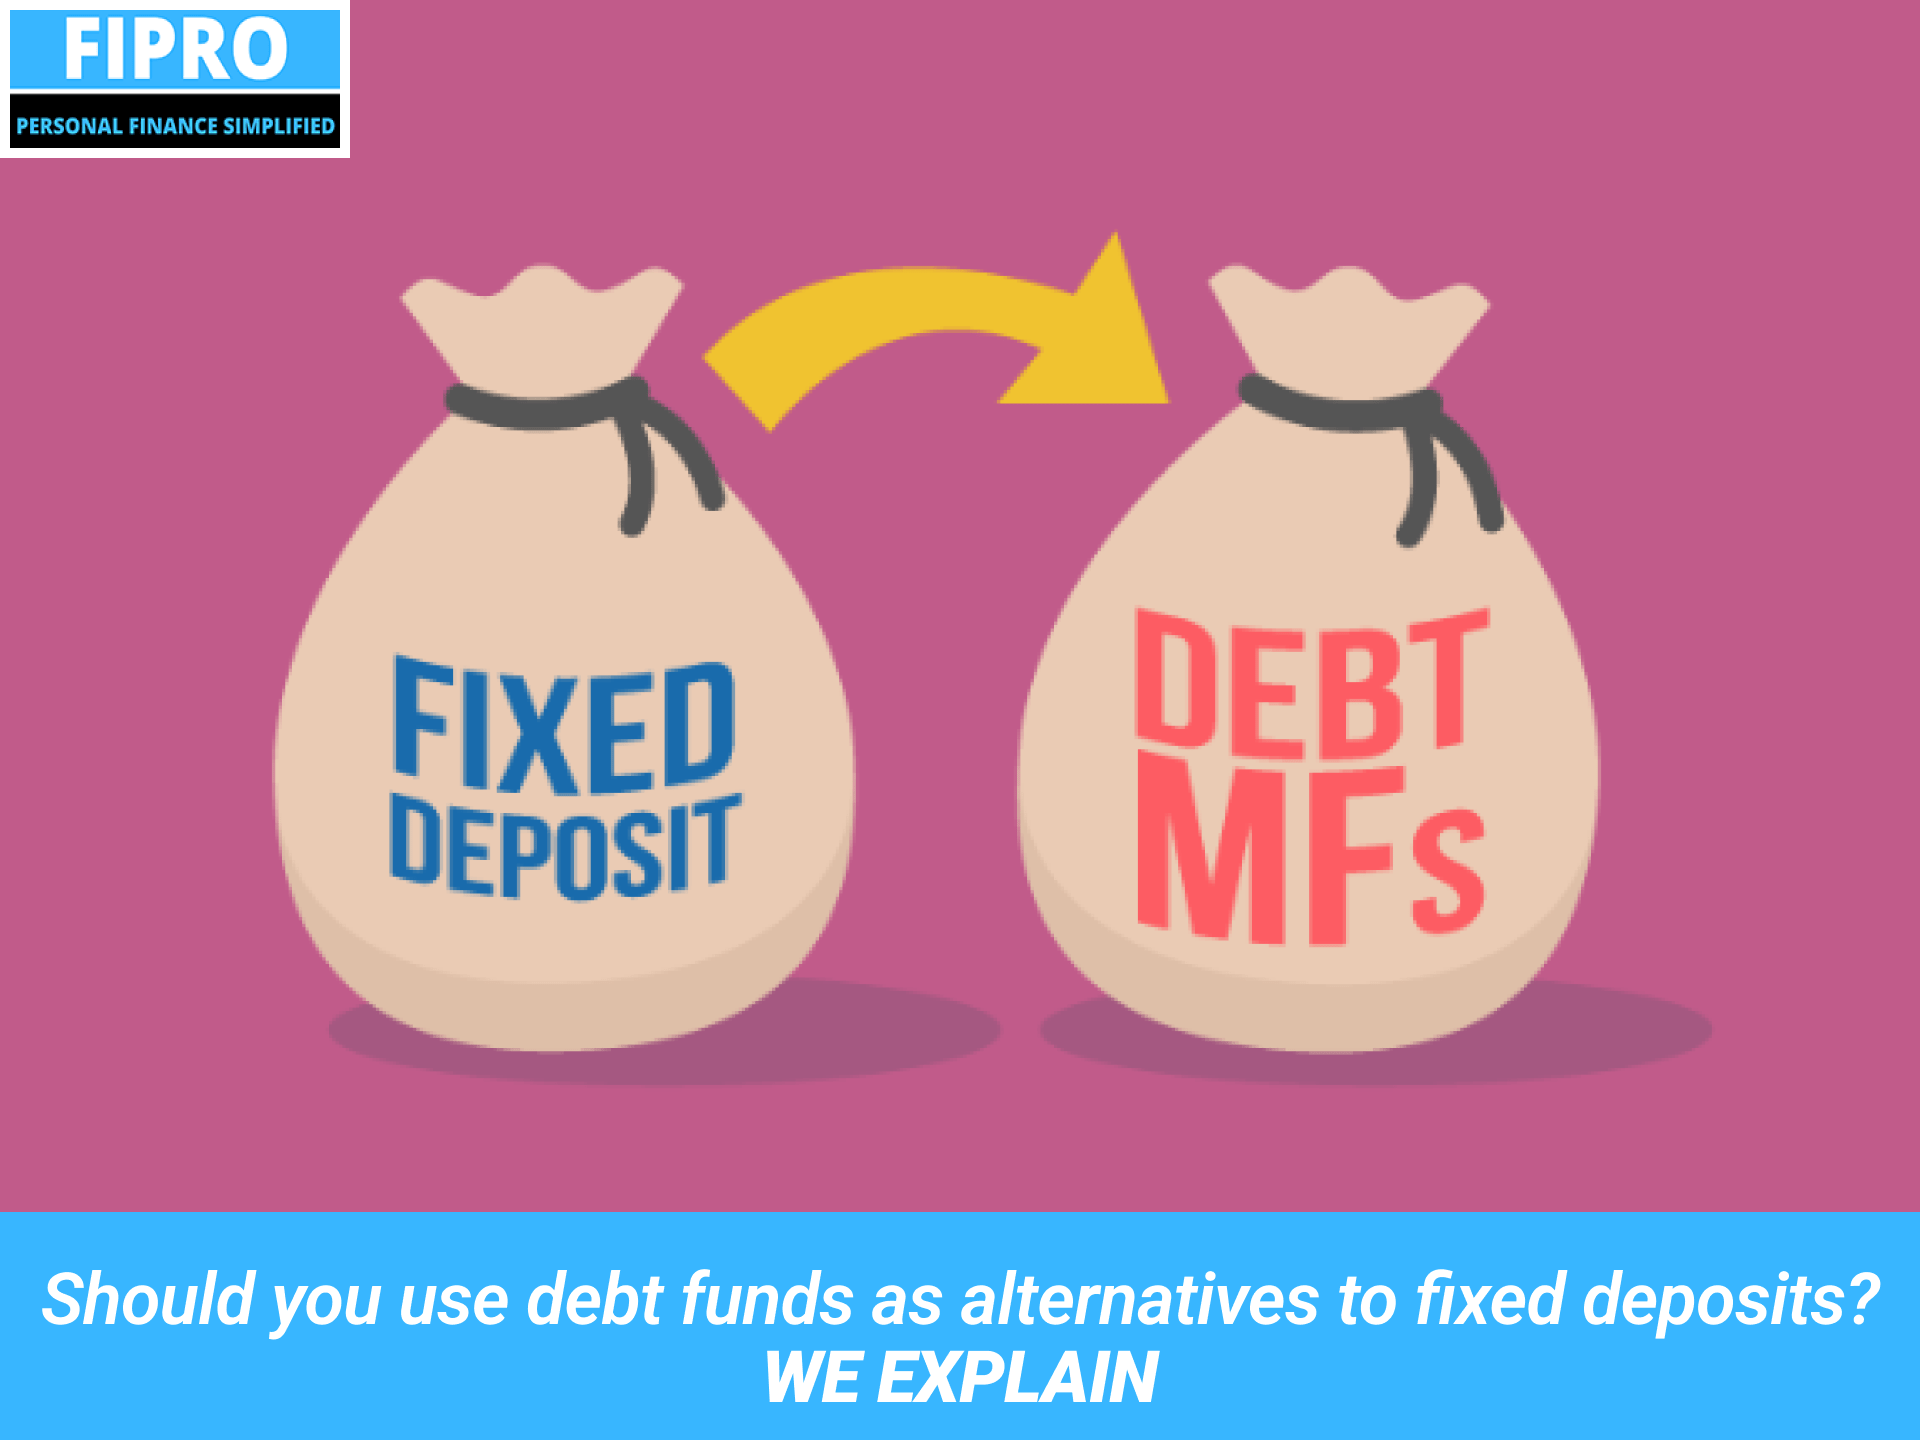 Should you use debt funds as alternatives to fixed deposits? We explain - Fipro Education And Investments